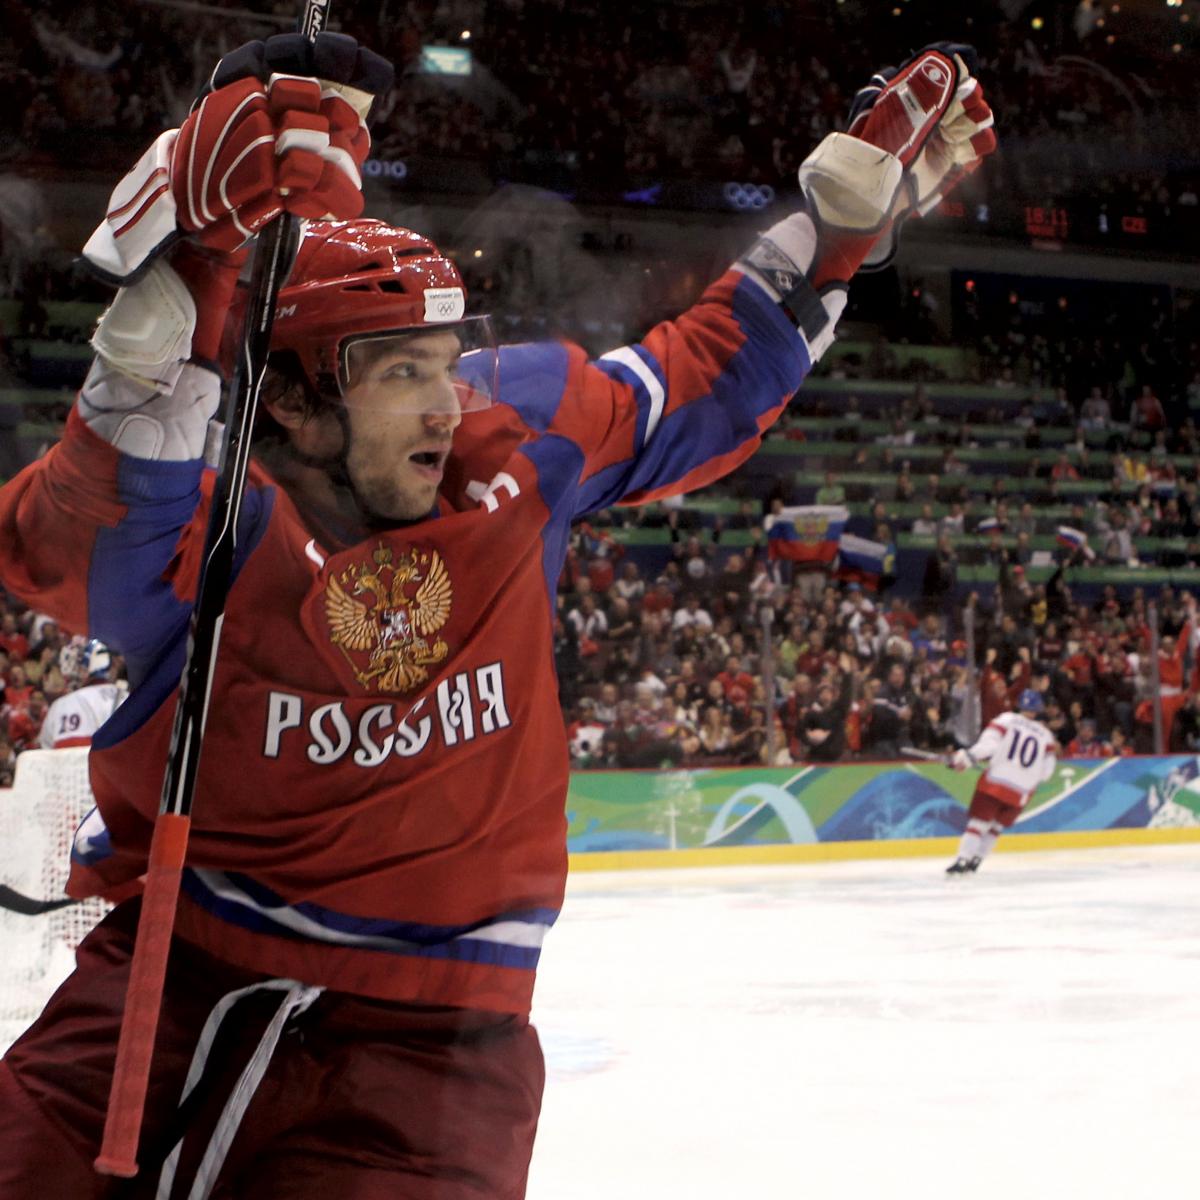 Alex Ovechkin will be the first Russian torch bearer for the 2014